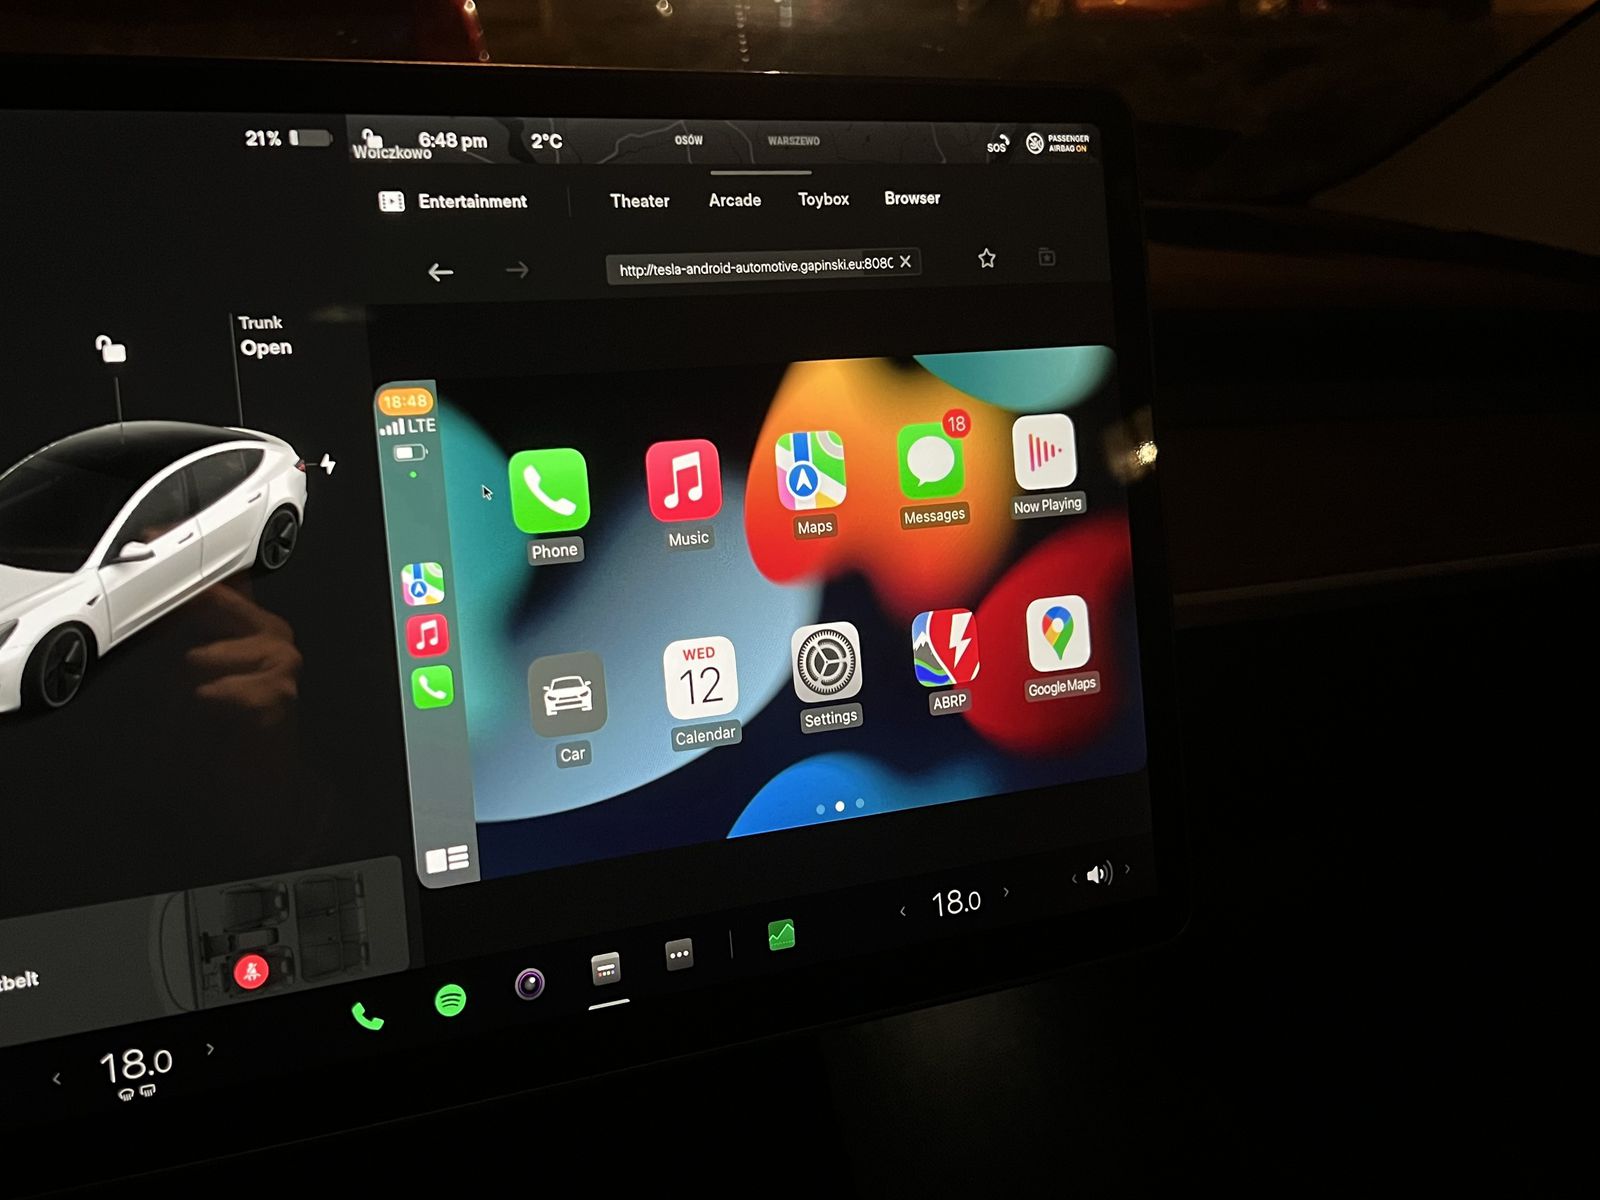 Streaming Audio From Your iPhone To a Tesla Sound System - A Step-by-Step Guide